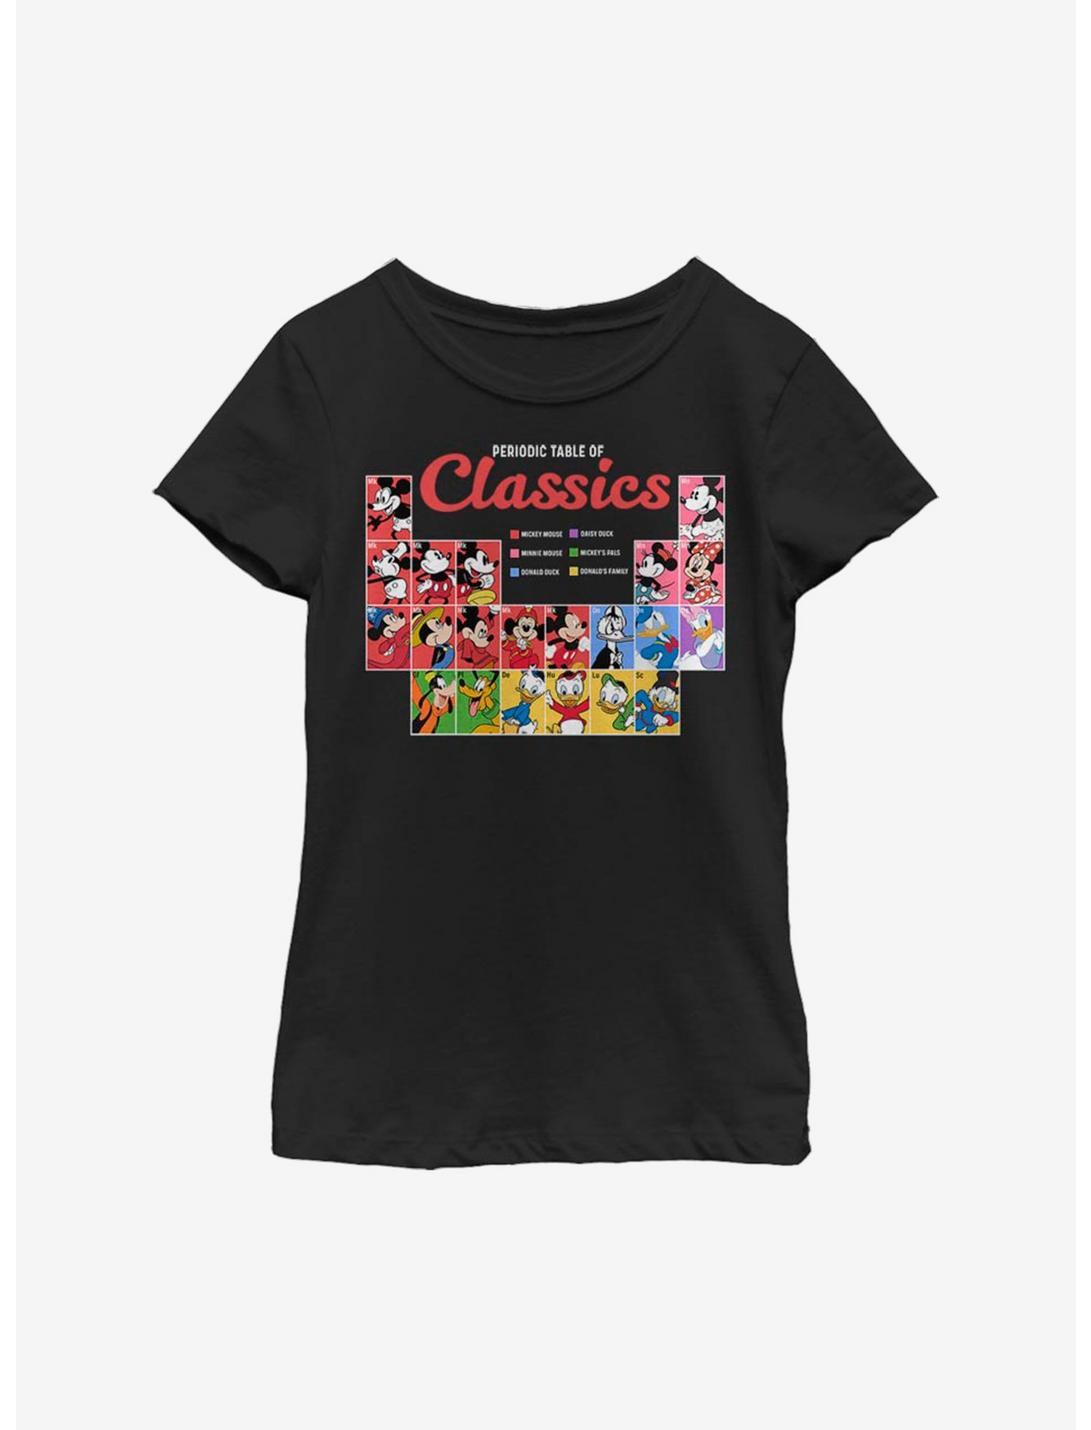 Disney Mickey Mouse Periodic Table Of Classics Youth Girls T-Shirt, BLACK, hi-res